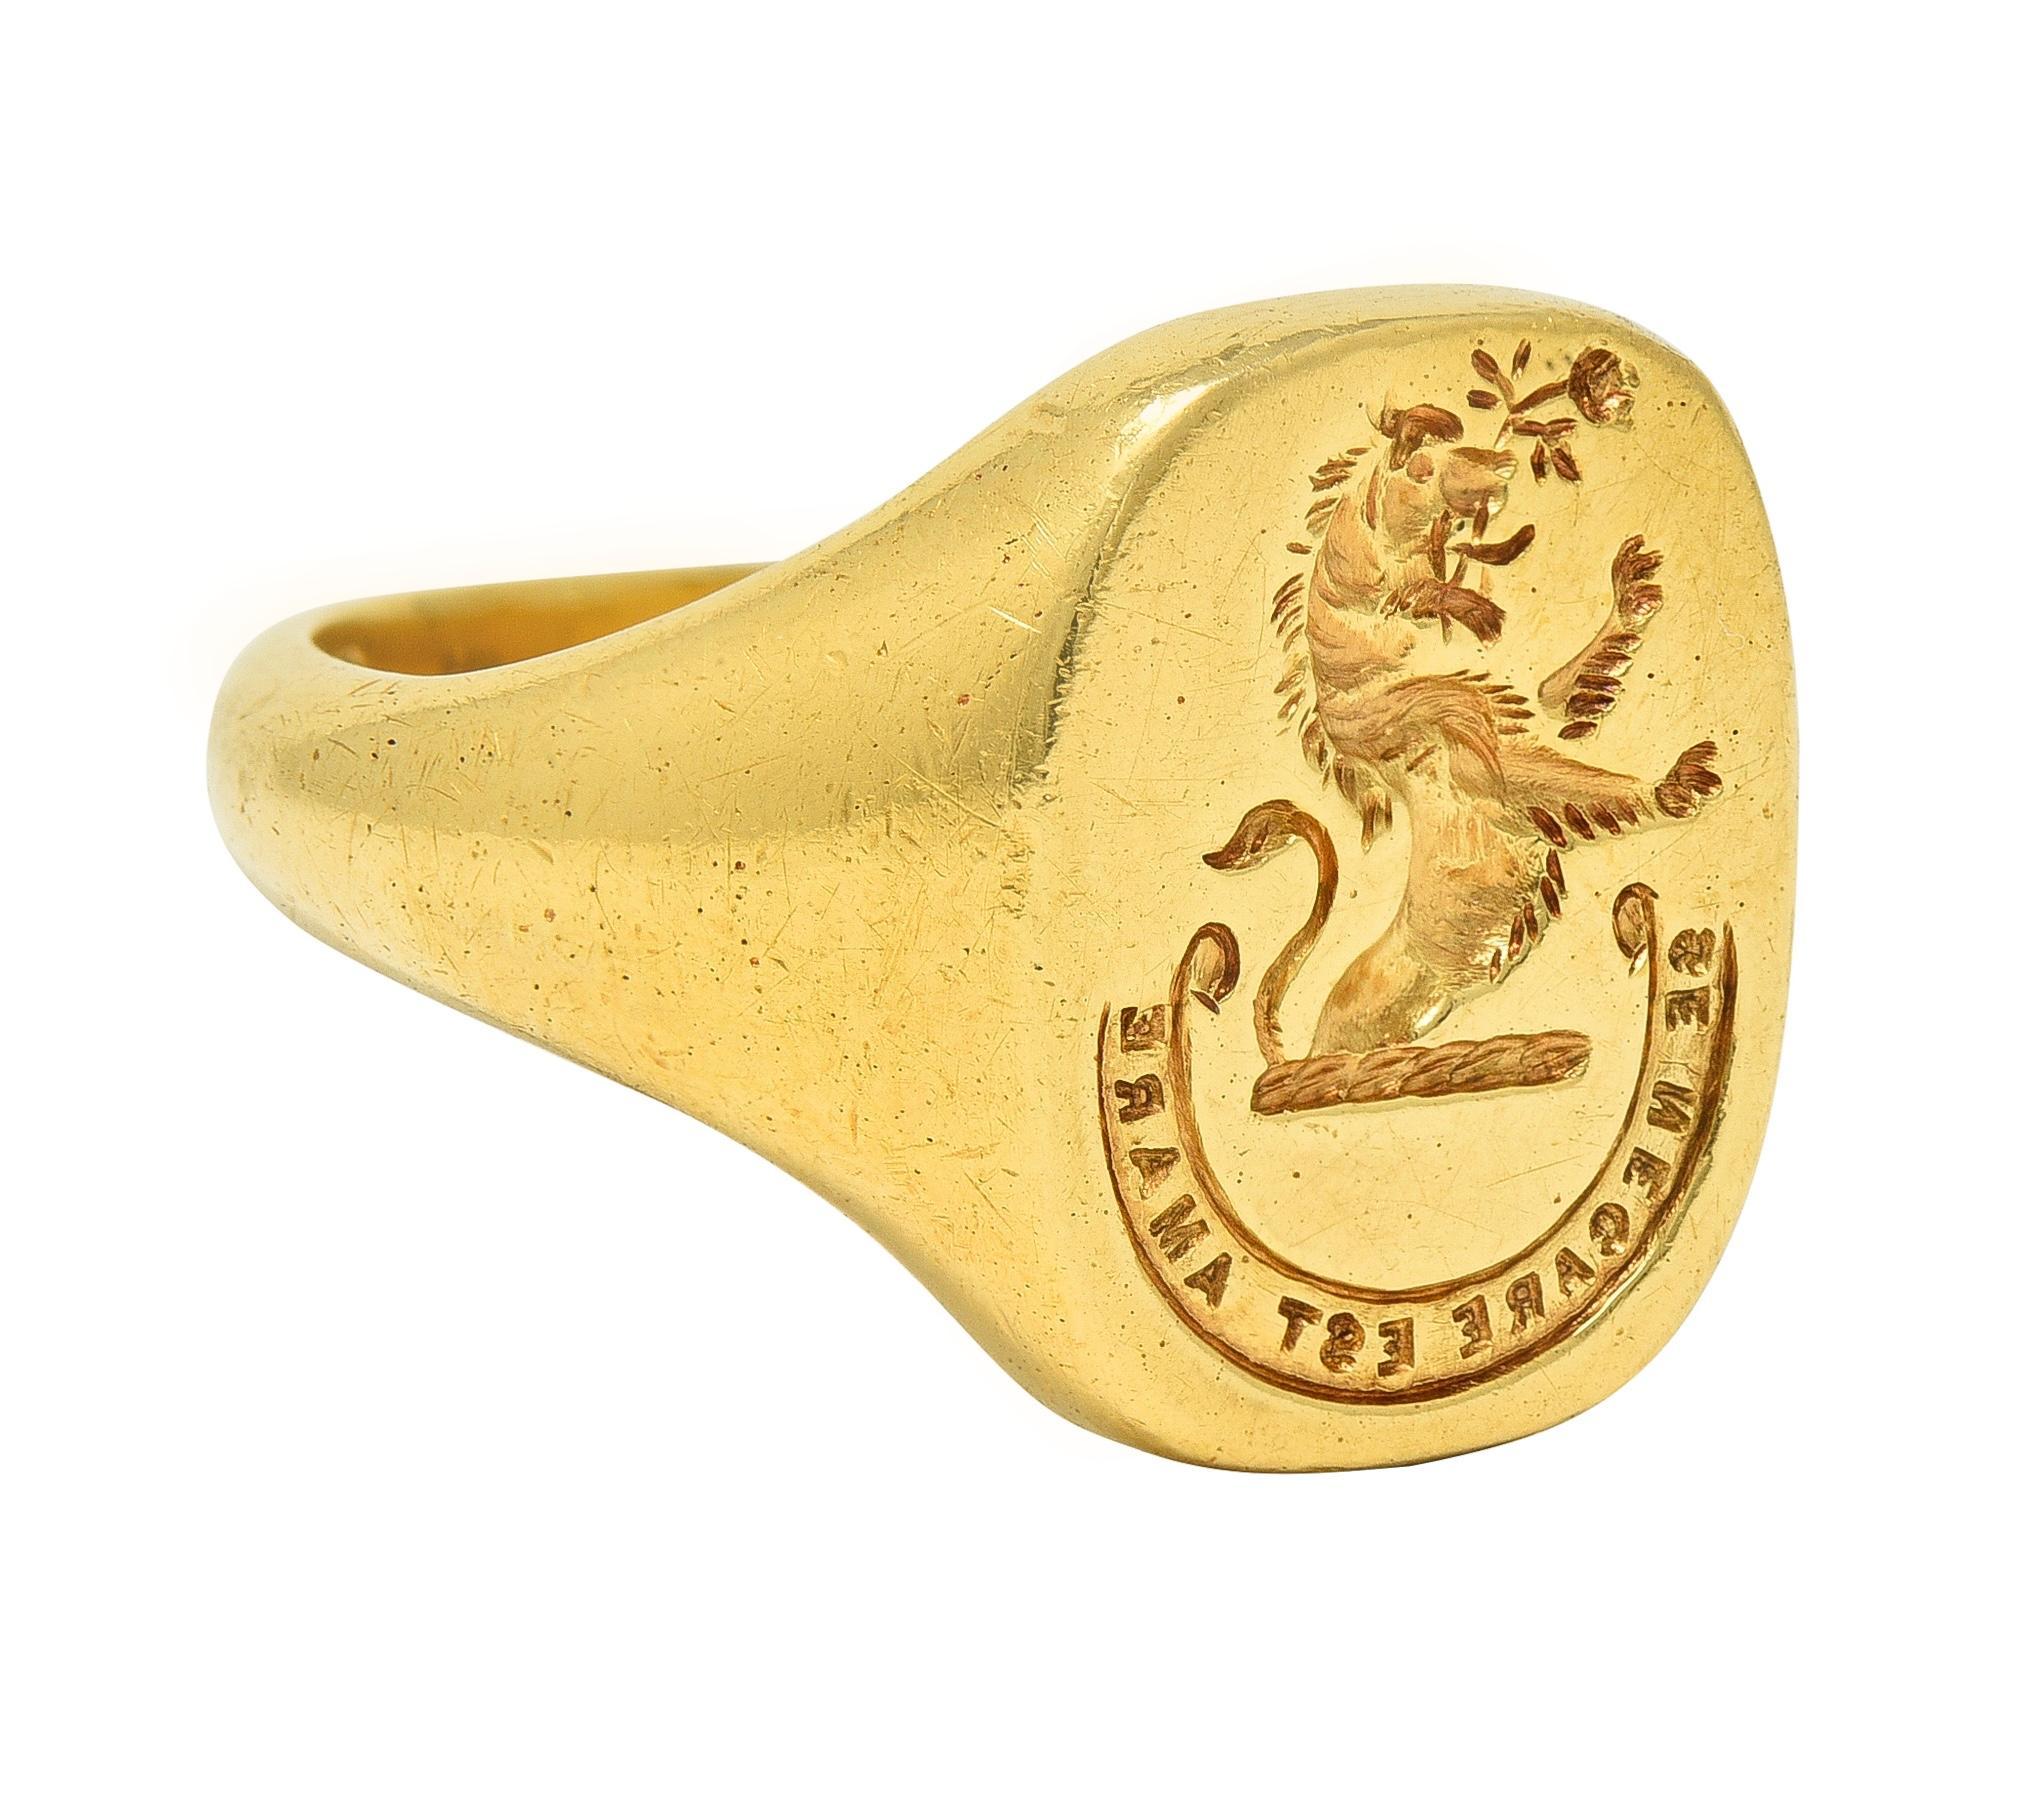 Designed a cushion-shaped signet face with a carved intaglio
Depicting a heraldic lion holding a rose in its mouth above scroll
Inscribed in Latin 'Se Necare Est Amare' on curling scroll
Translates to 'To Love Is To Kill Oneself'
Completed by